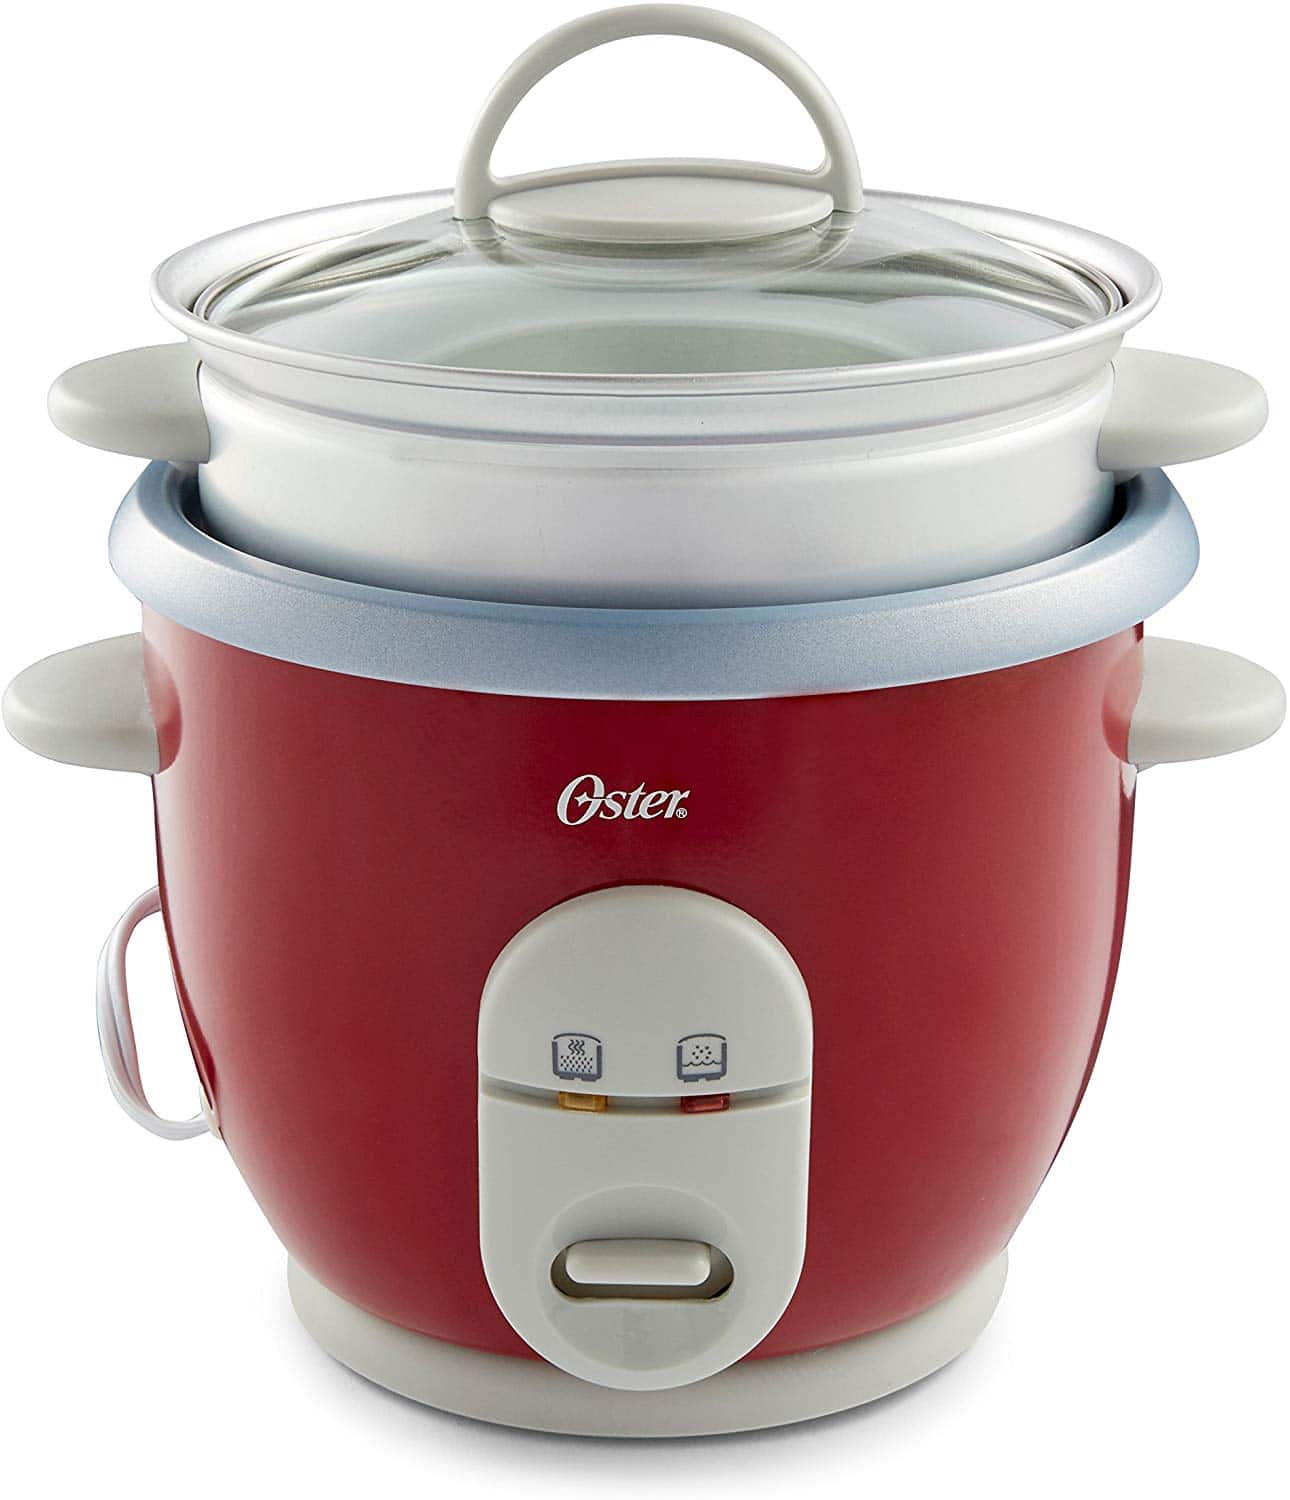 Oster 6-Cup Rice Cooker with Steamer